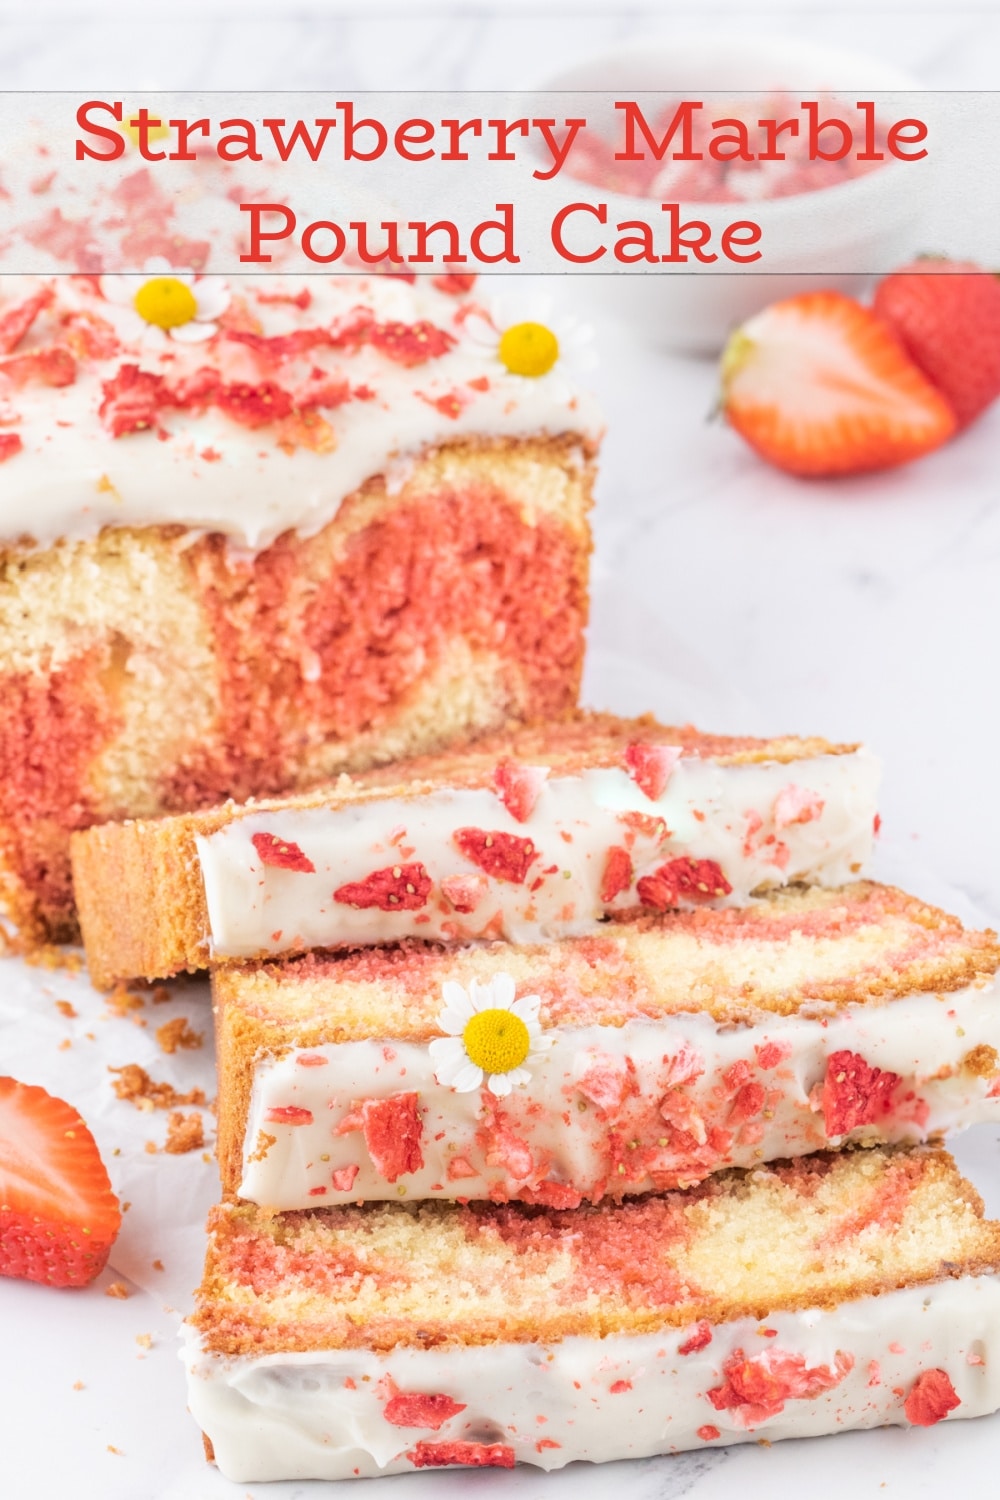 This Strawberry Marbled Pound Cake is a festive dessert that combines classic flavors of vanilla and strawberry in an eye-catching, swirled pattern. This cake's soft and crumby texture, along with its cream cheese frosting make it the perfect addition to any dessert table. via @cmpollak1